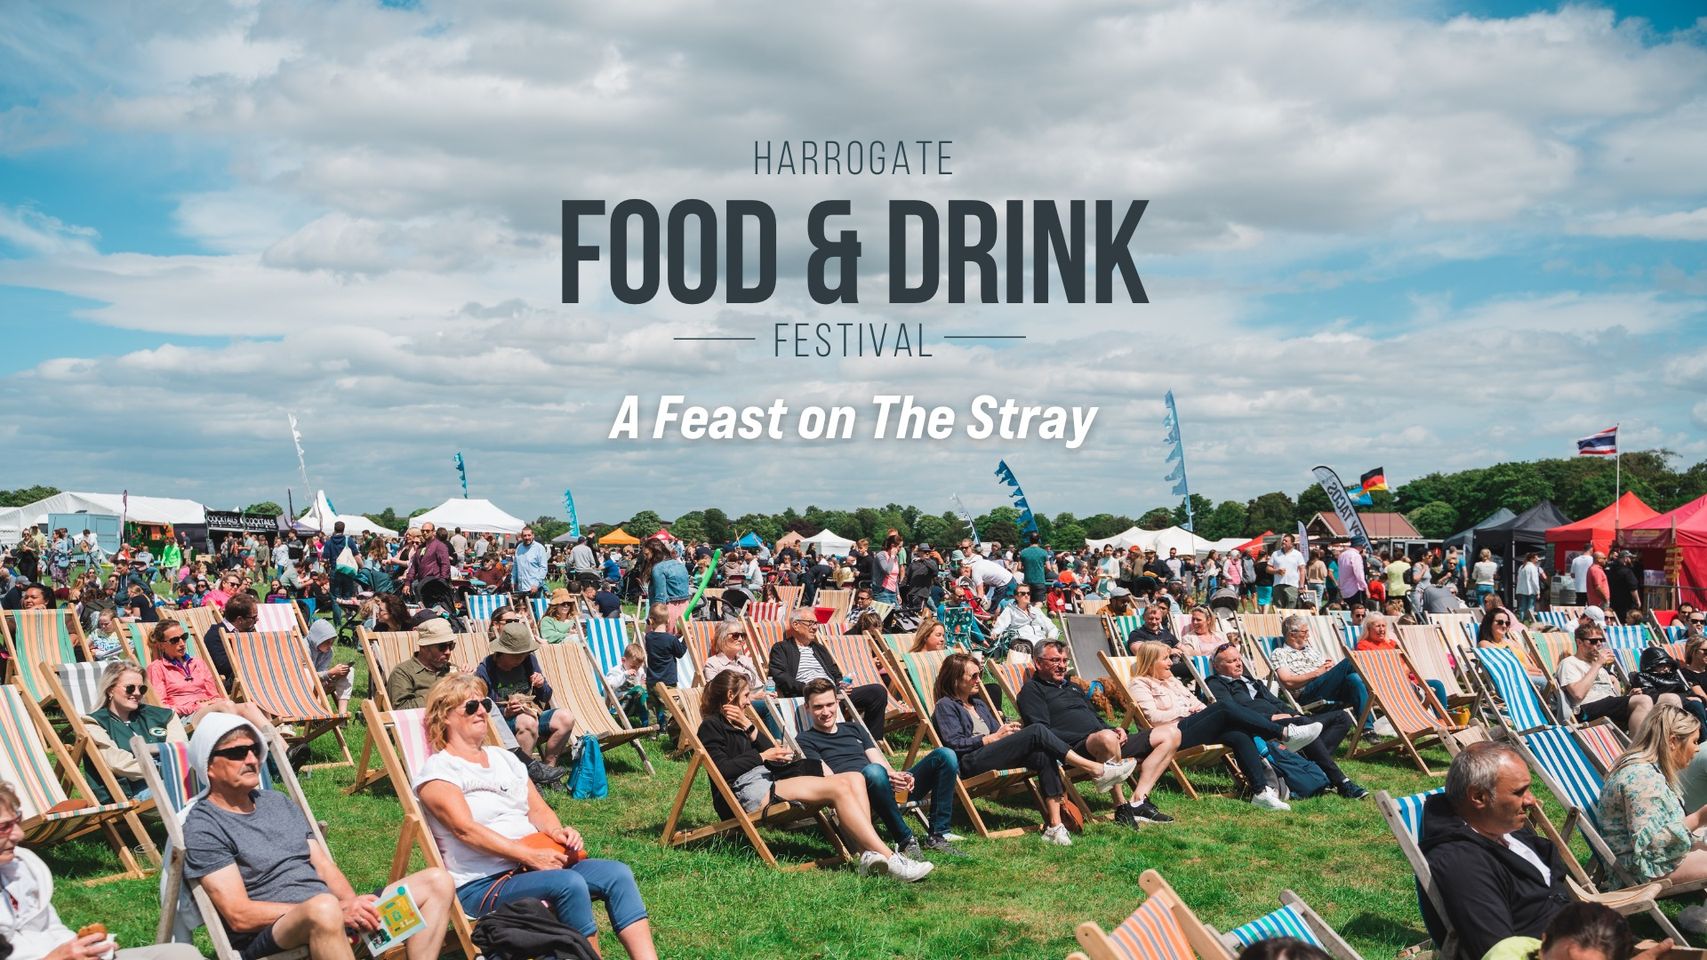 Image name harrogate food and drink festival on the stray yorkshire the 27 image from the post Harrogate Food & Drink Festival 2023: A Feast on The Stray in Yorkshire.com.